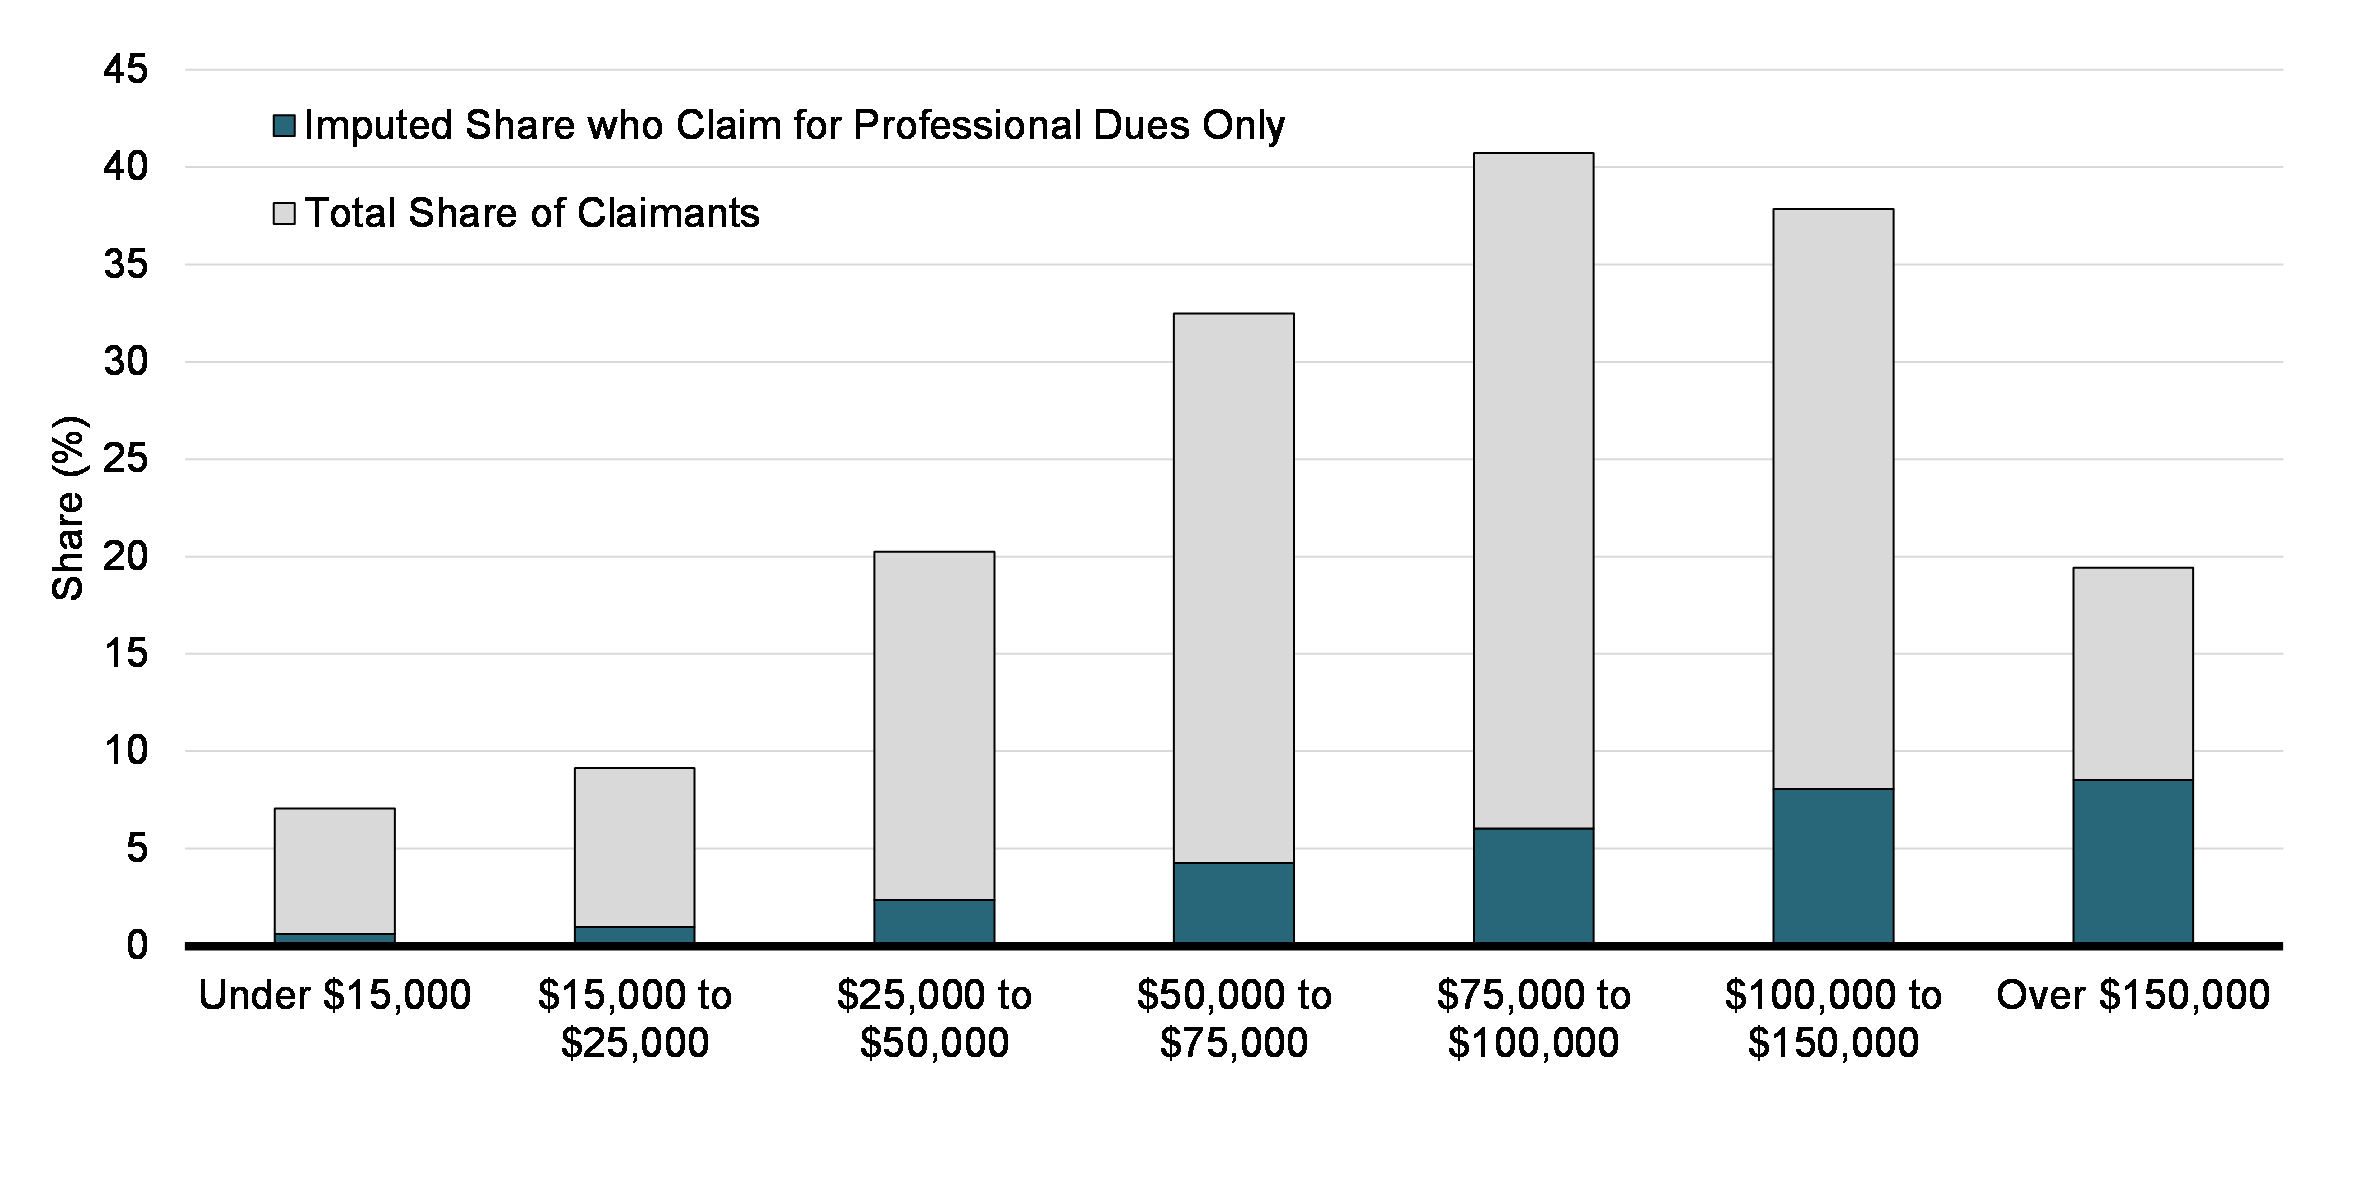 Chart 11: Share of UPD Claimants among Taxfilers and Imputed Share of Claimants of Professional Dues Only among Claimants, by Income Group (2019)